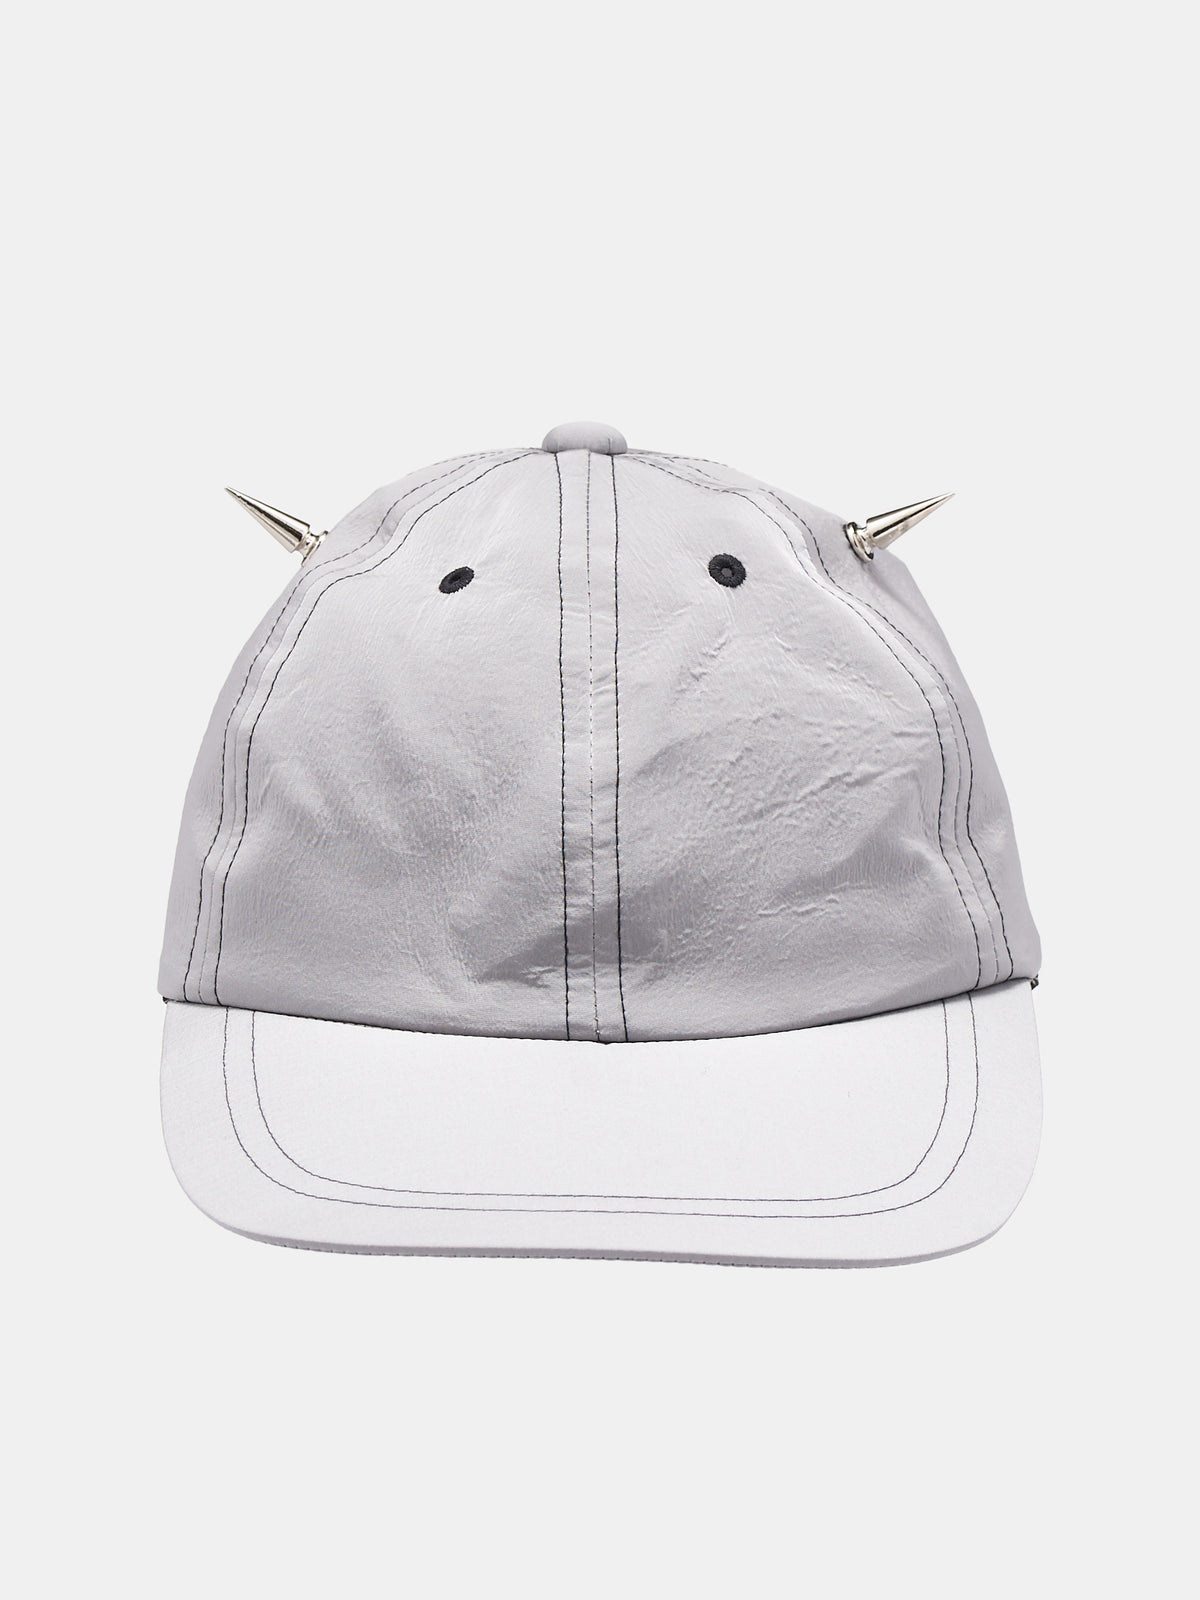 Spiked Hat (BS240701-GRAY)